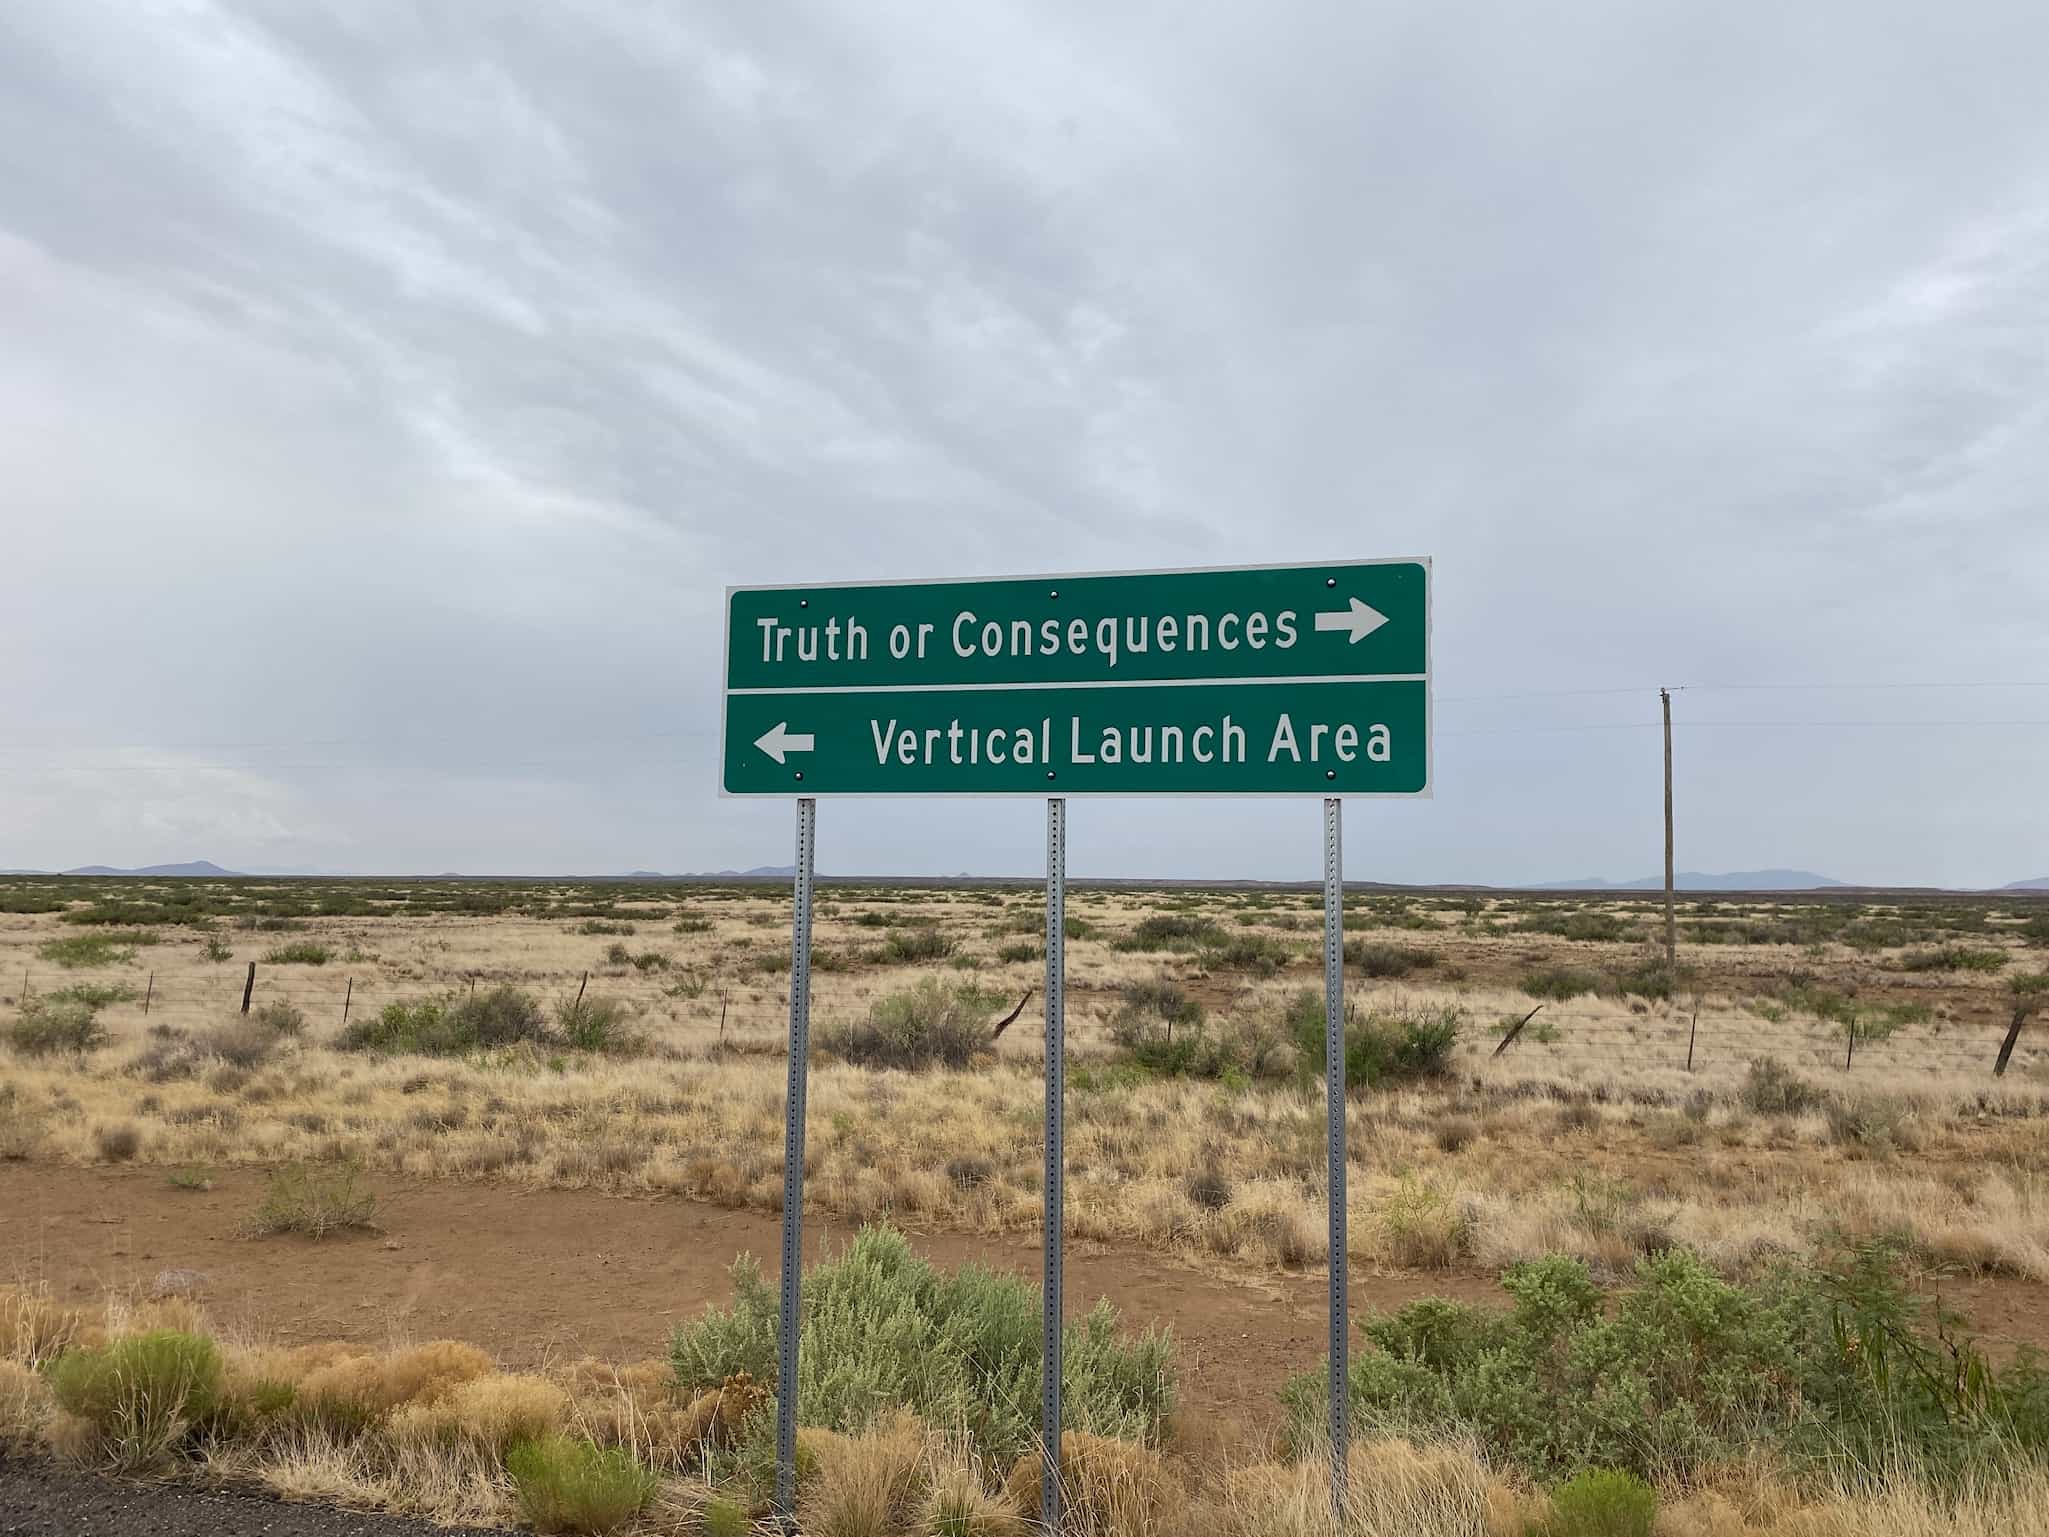 photo of traffic sign for truth or consequences/vertical launch area